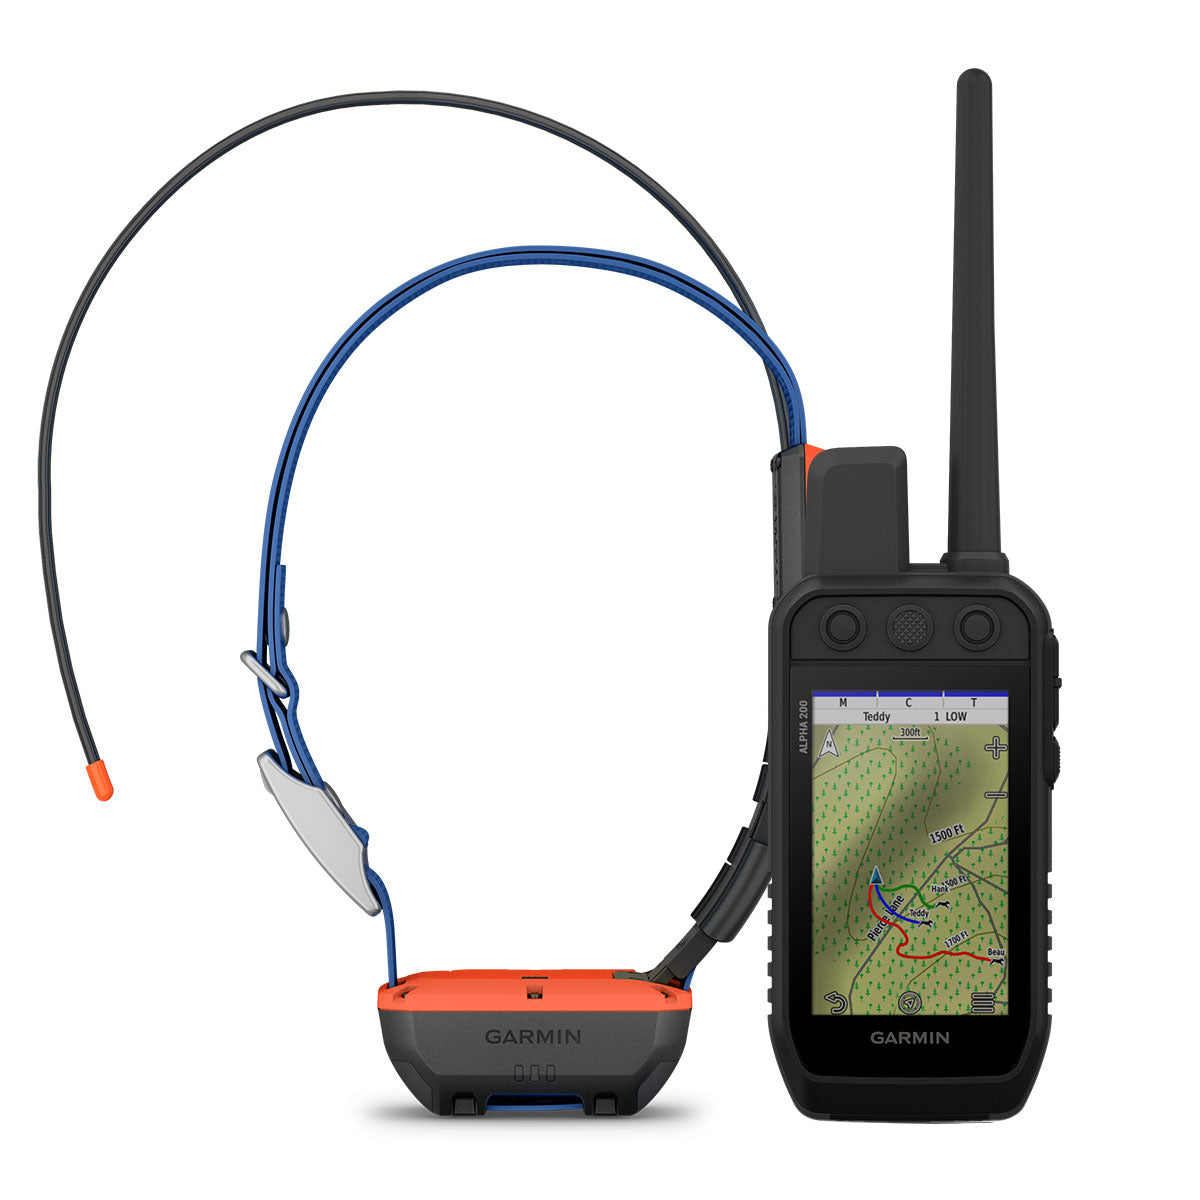 2022 Garmin Outdoor Sales & Best Holiday Gifts